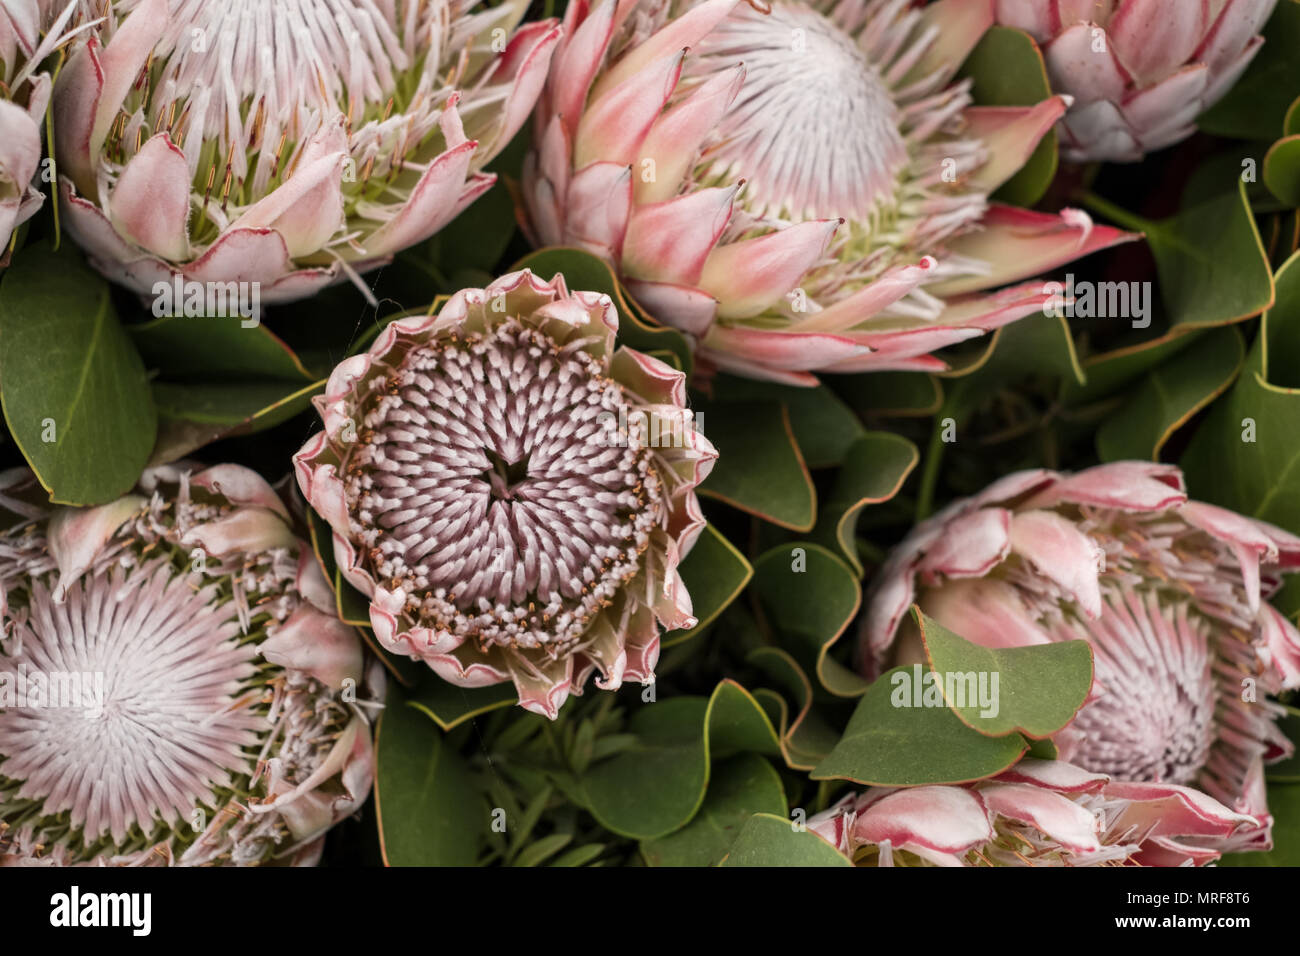 Pink protea flowers amongst green foliage, national flower of South Africa  Stock Photo - Alamy